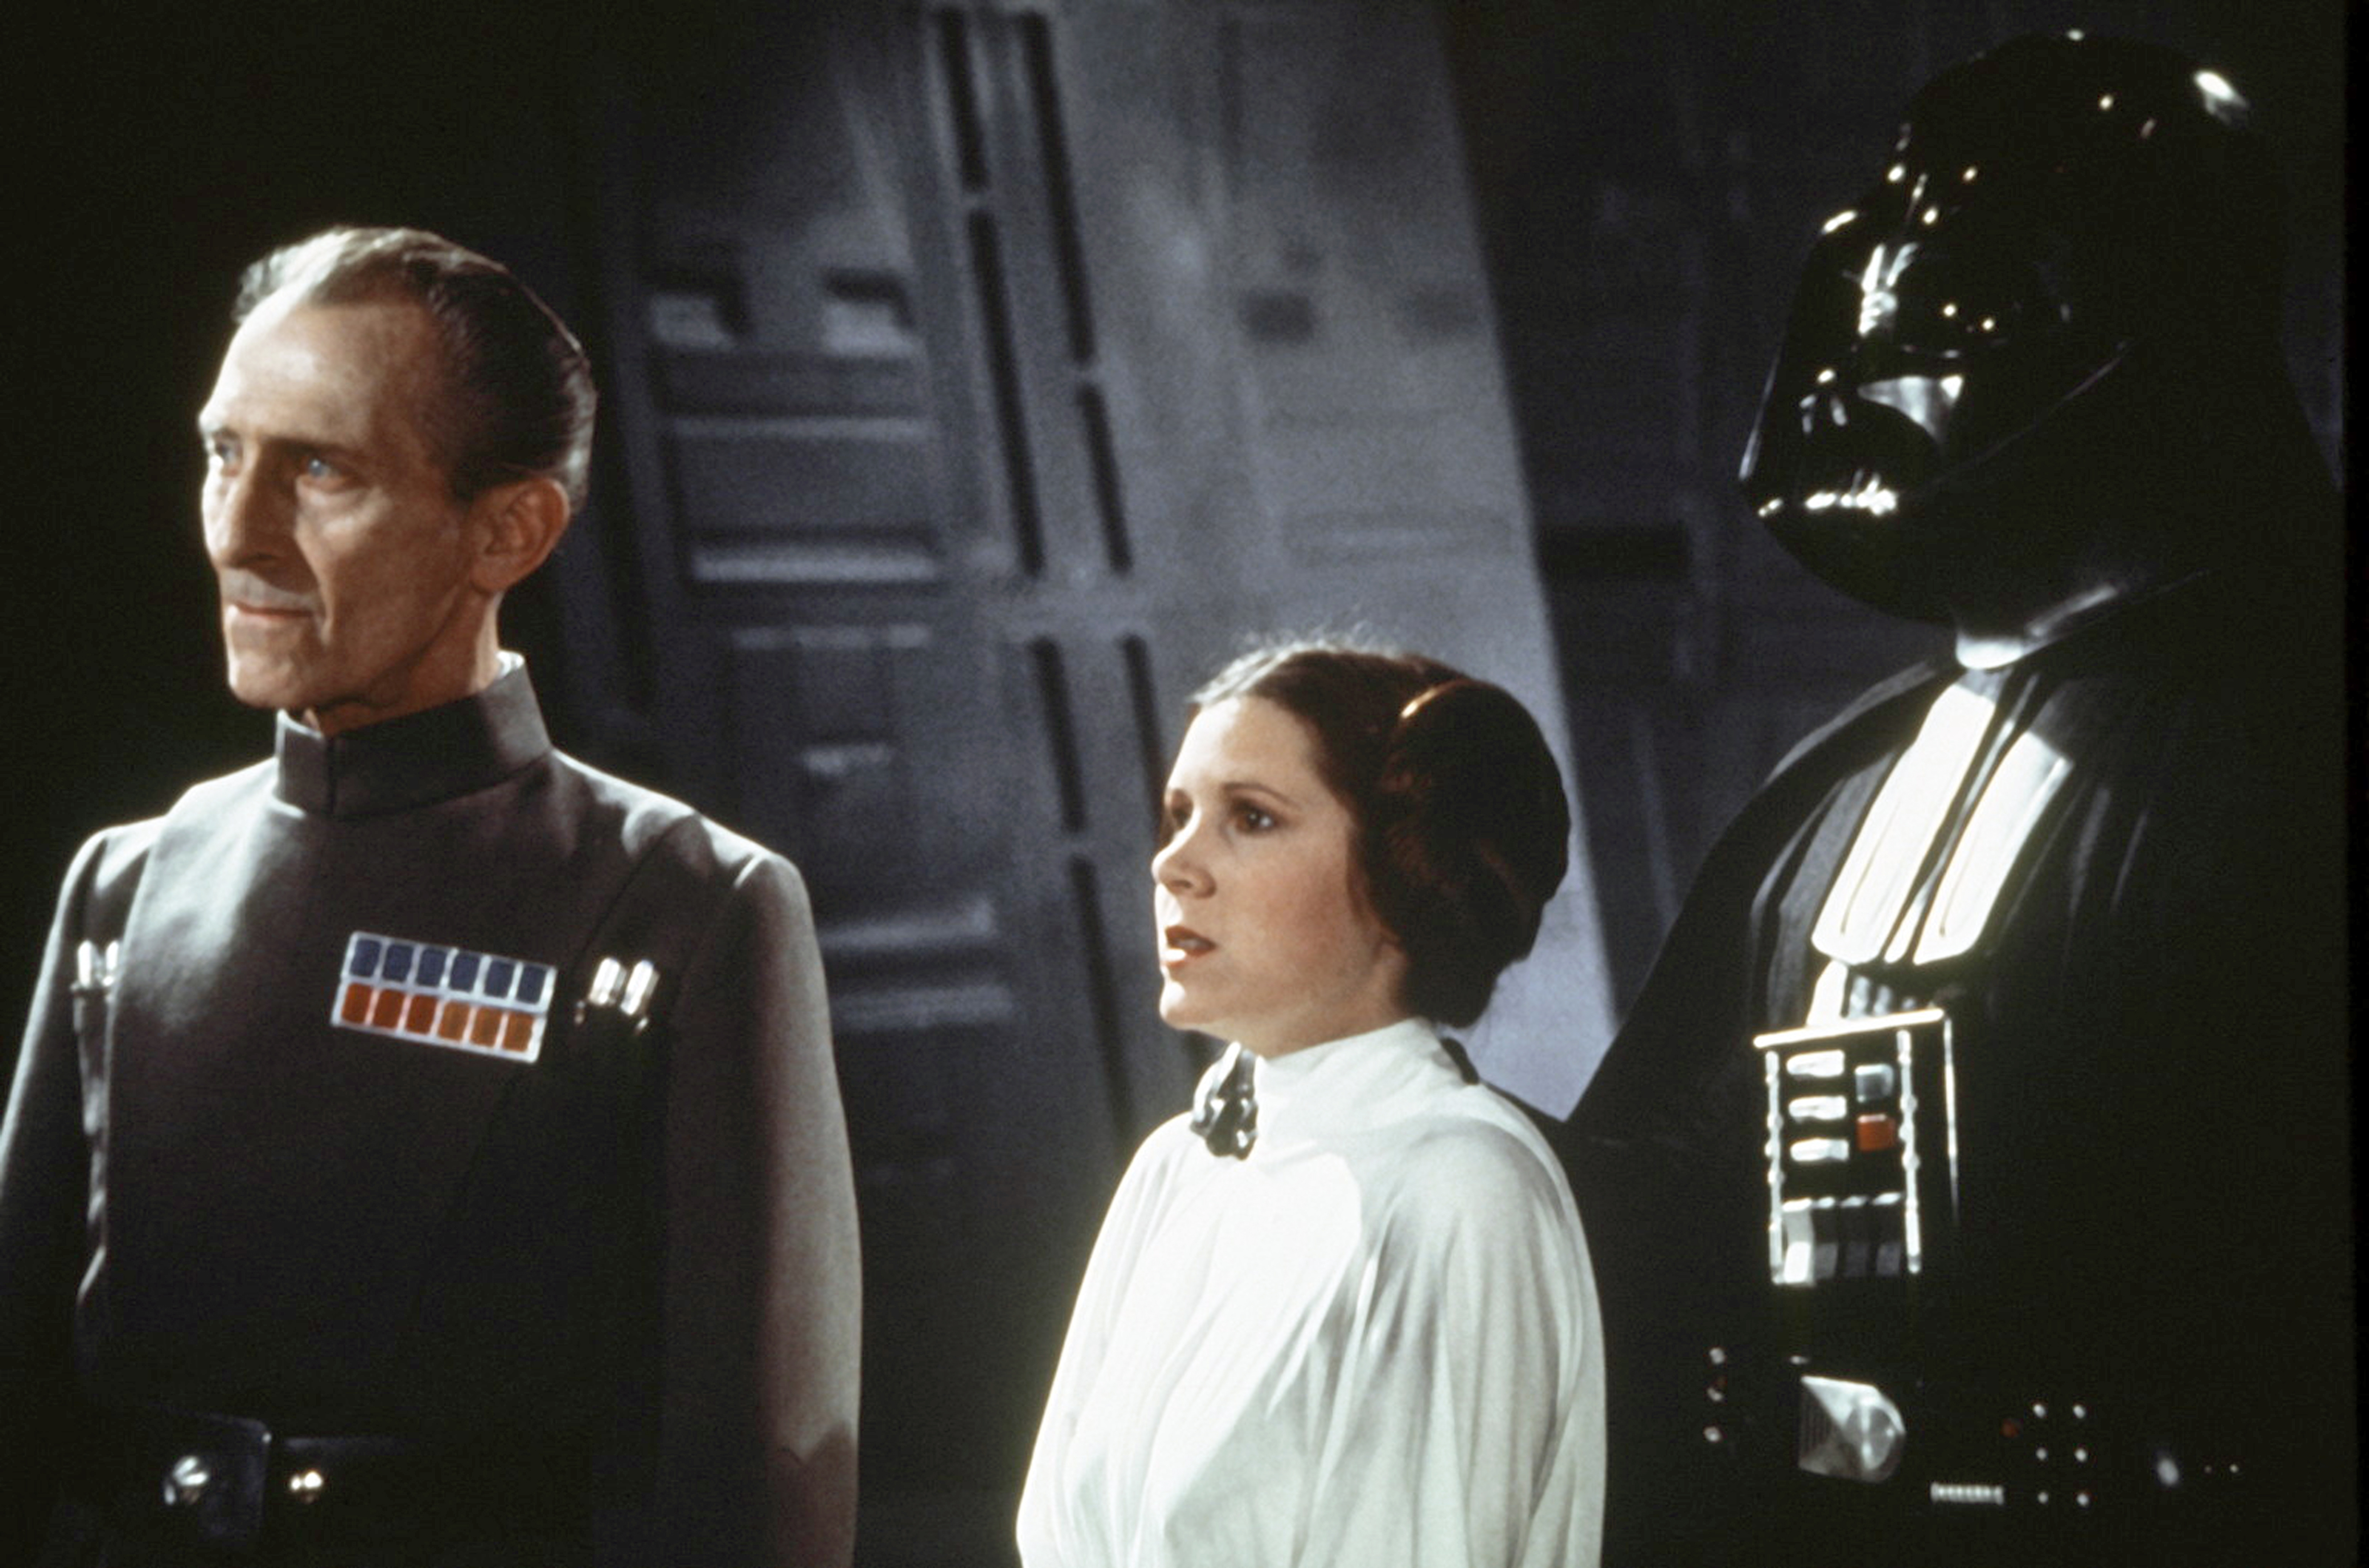 British actors Peter Cushing, David Prowse, and American actress Carrie Fisher on the set of Star Wars: Episode IV - A New Hope written, directed and produced by Georges Lucas. (Photo by Sunset Boulevard/Corbis via Getty Images)